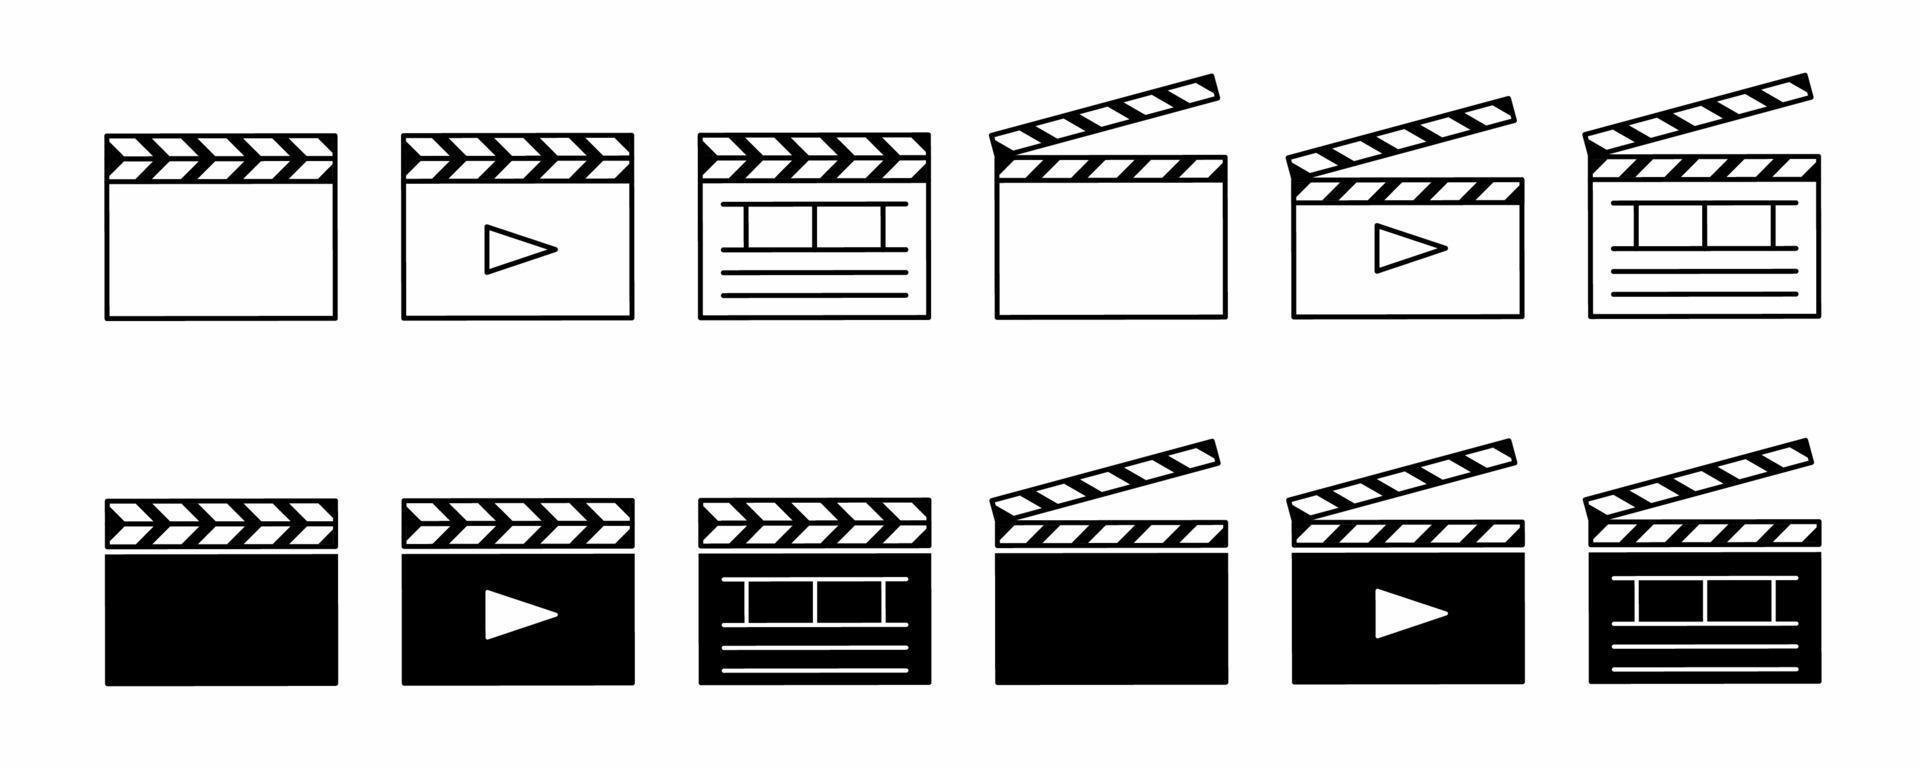 clapper board icon set isolated on white background vector